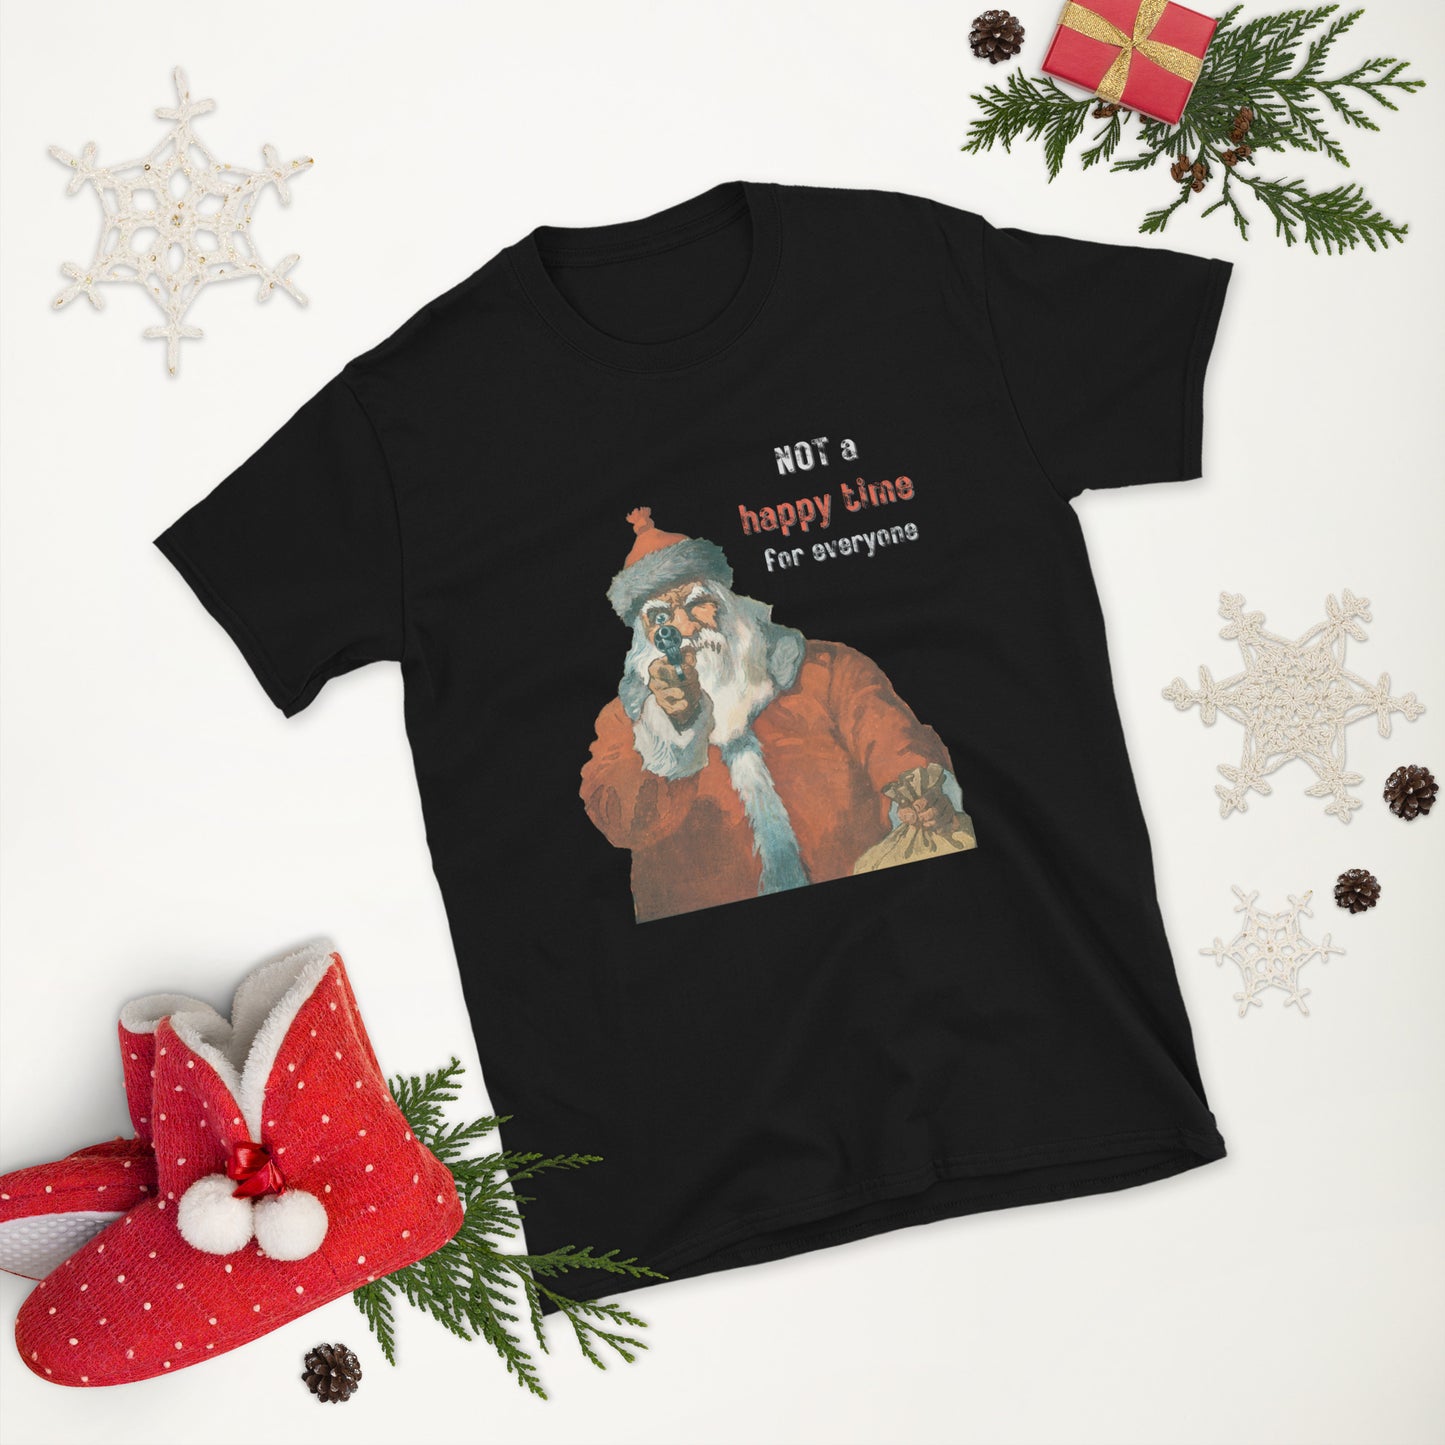 Not a Happy Time for Everyone Christmas Short-Sleeve Unisex T-Shirt, Bad Santa, Movie Quote, Vintage Image